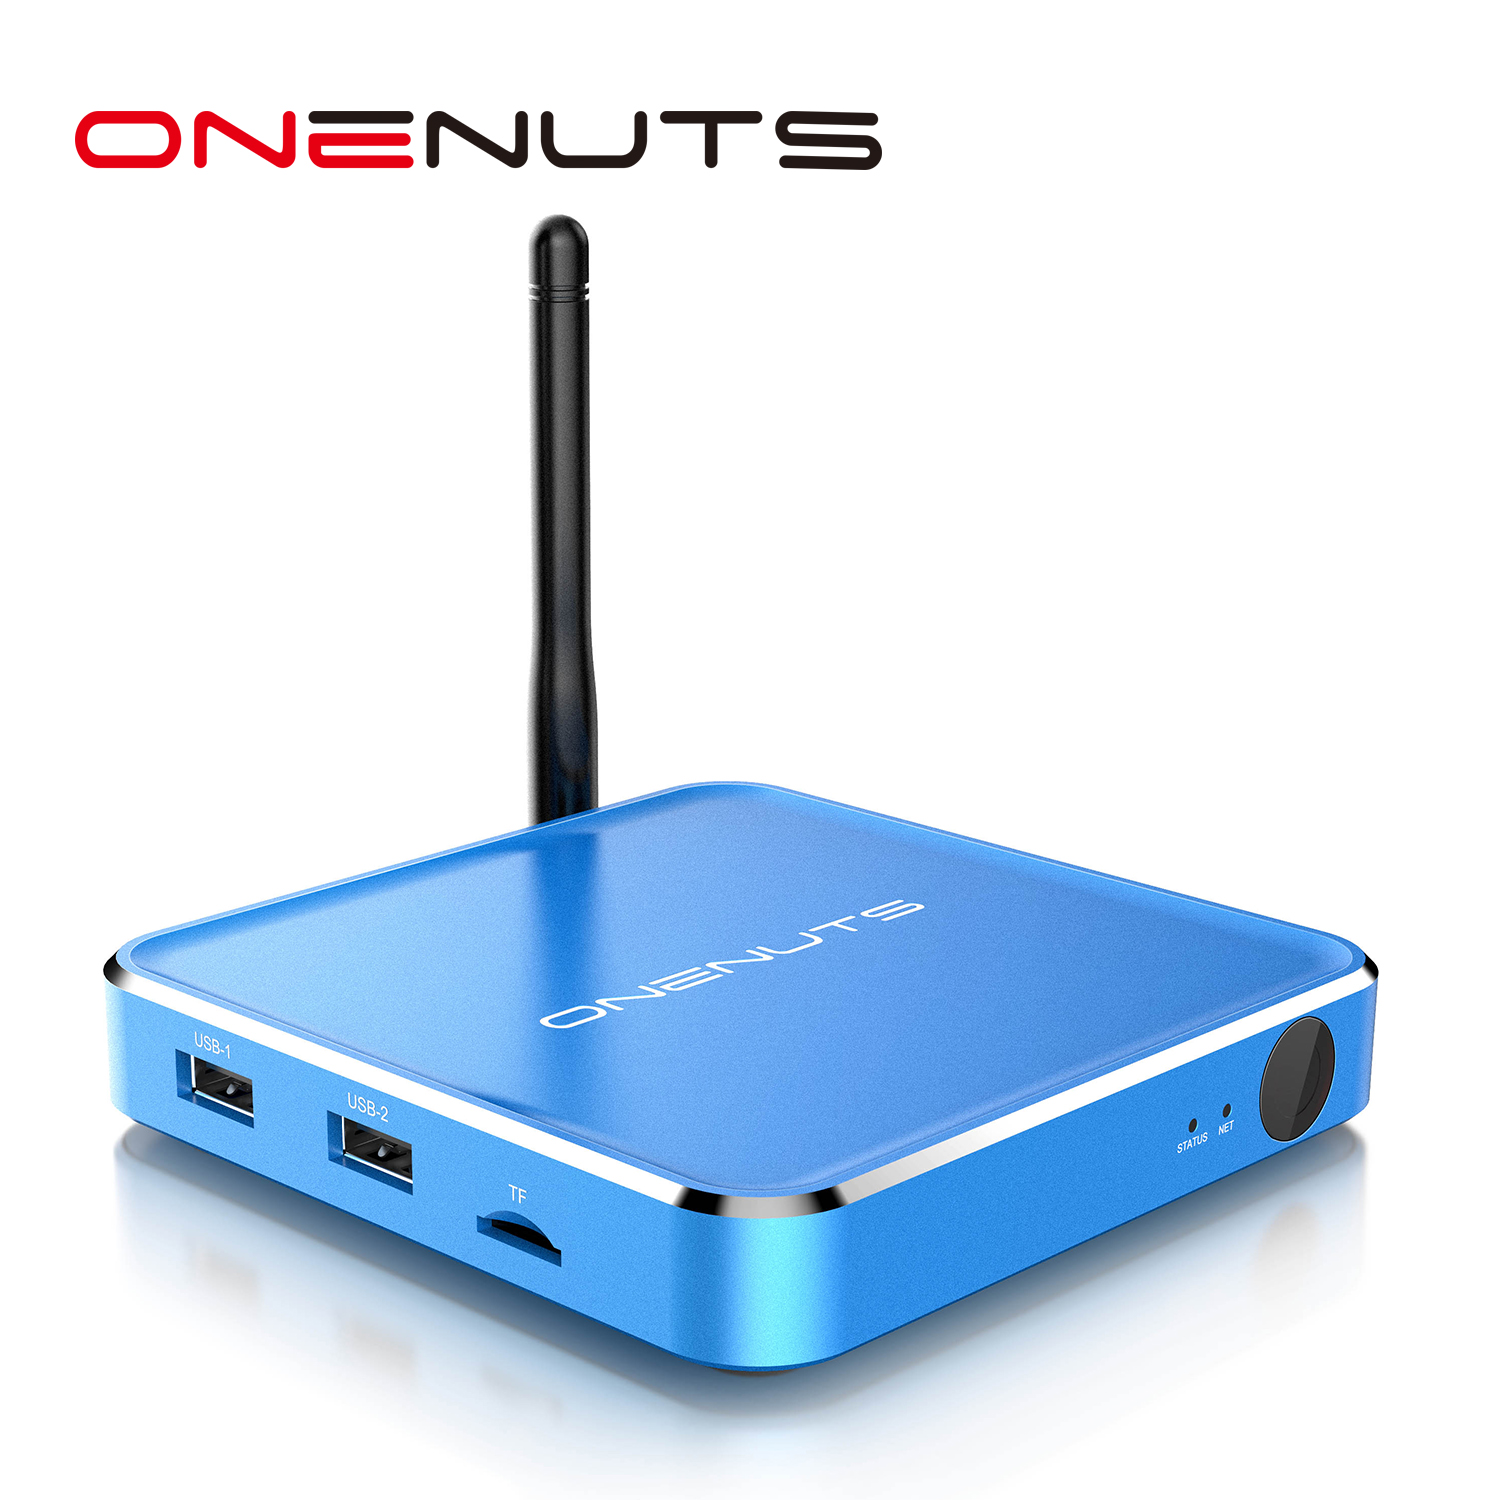 Bester Streaming-Internet-Player, neue Android-TV-Box mit Android 6.0